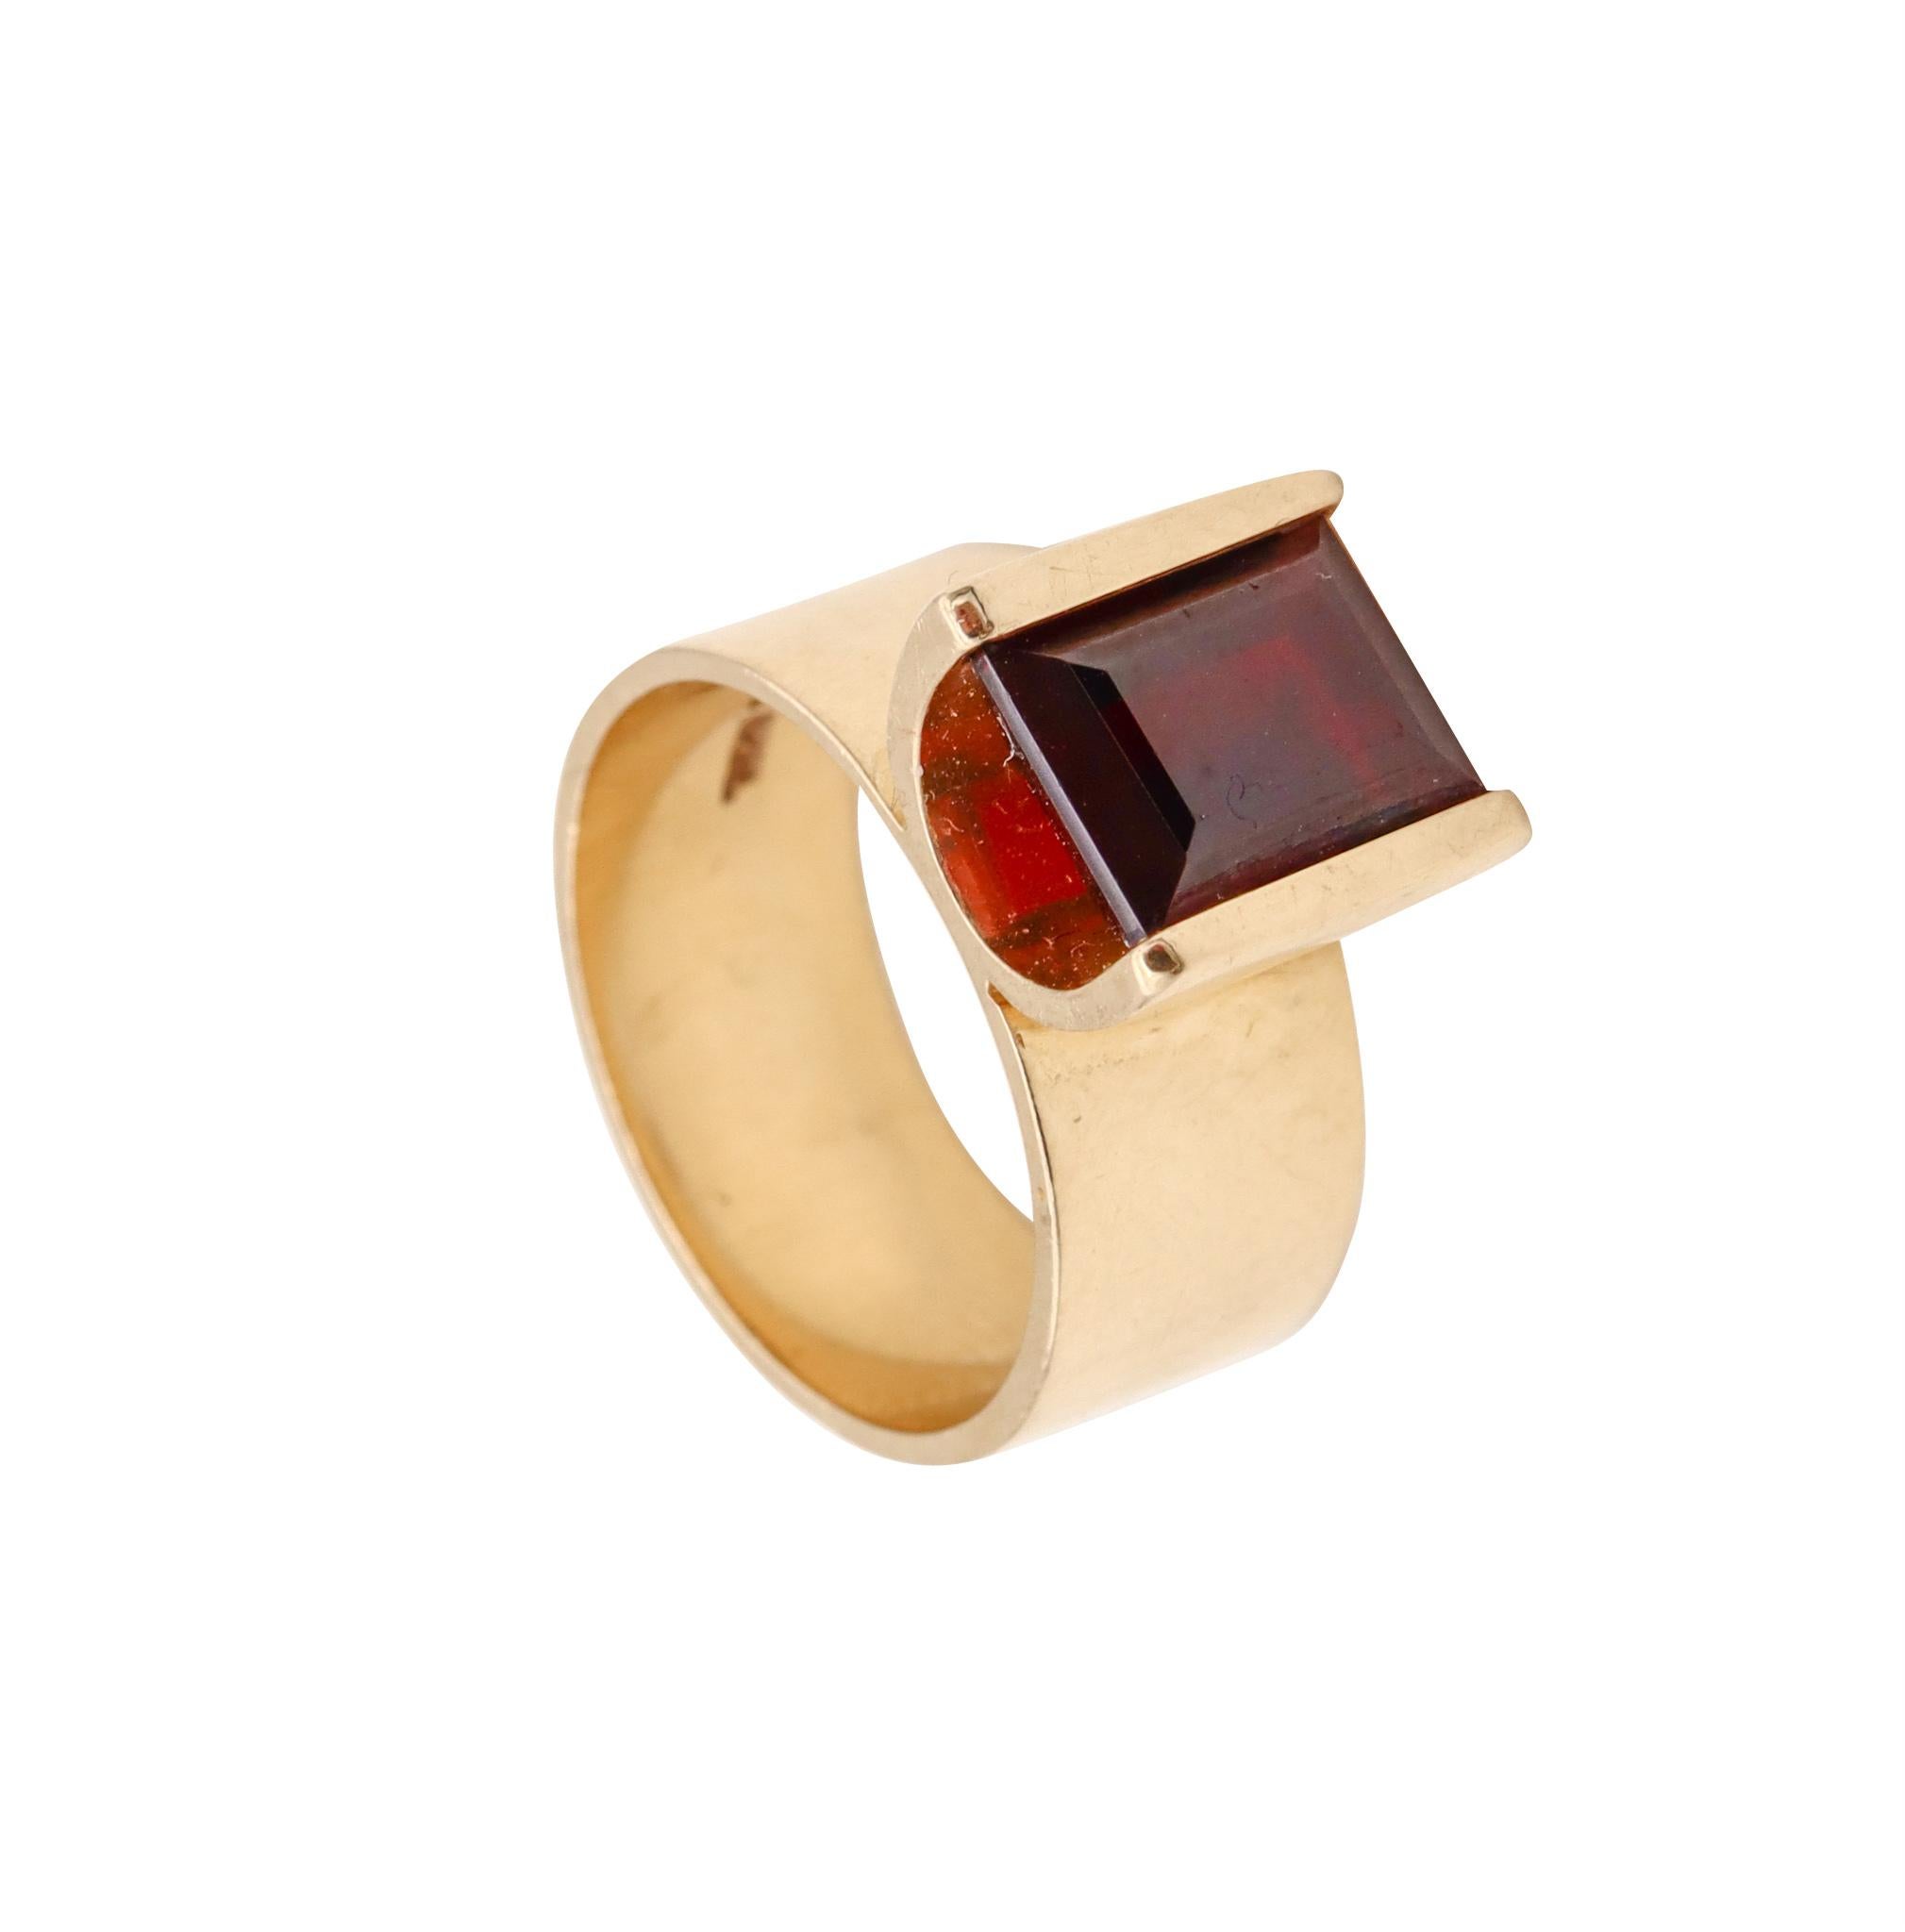 Modernist ring designed by Hubertus Von Skal.

Beautiful geometric piece made in Germany by the Bohemian designer and goldsmith Hubertus Von Skal, circa 1970's. This modernist ring was crafted in solid yellow gold of 14 karats, with high polished